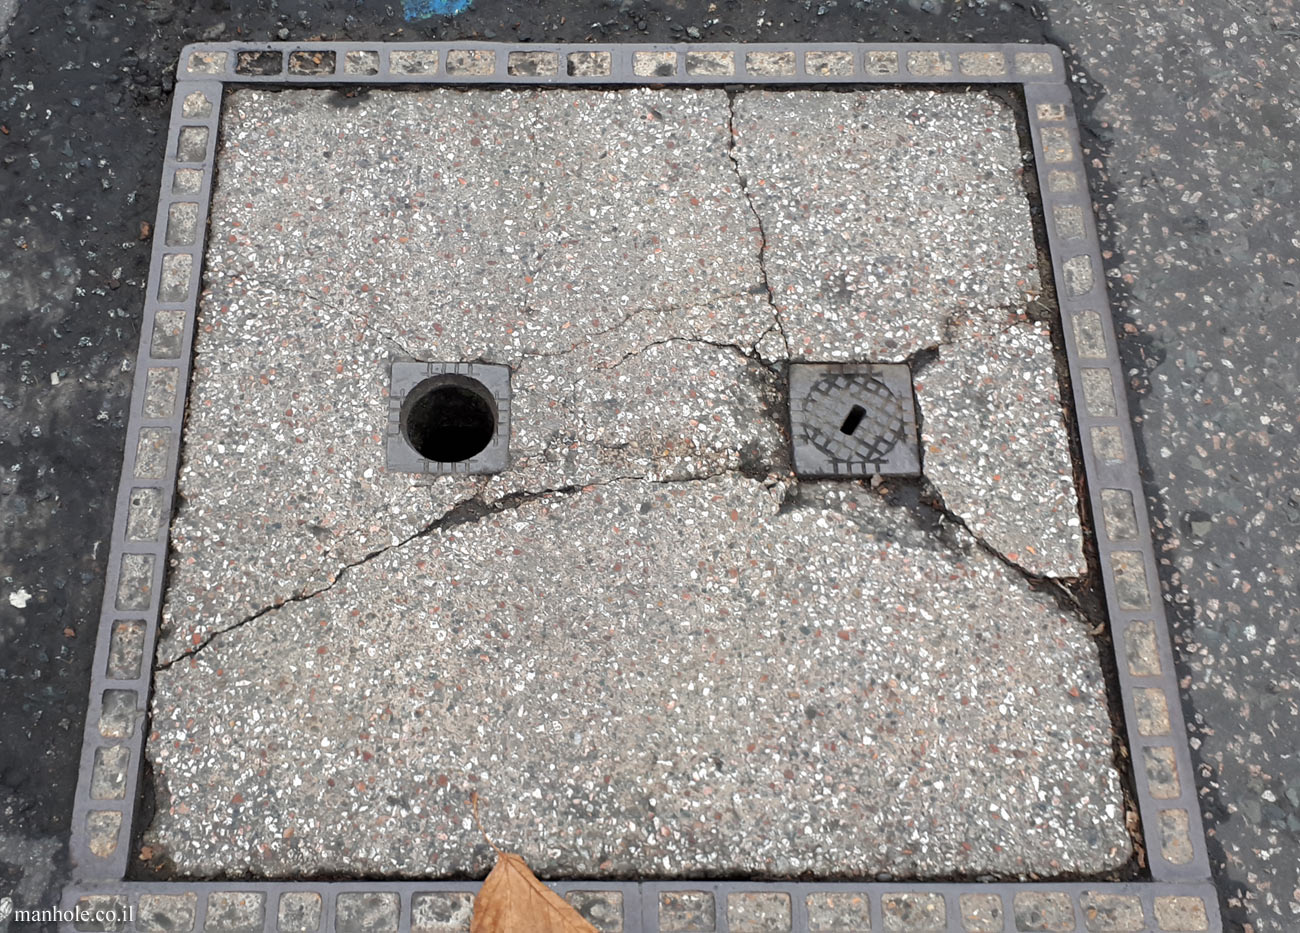 London - Hampstead - Concrete cover with two metal openings